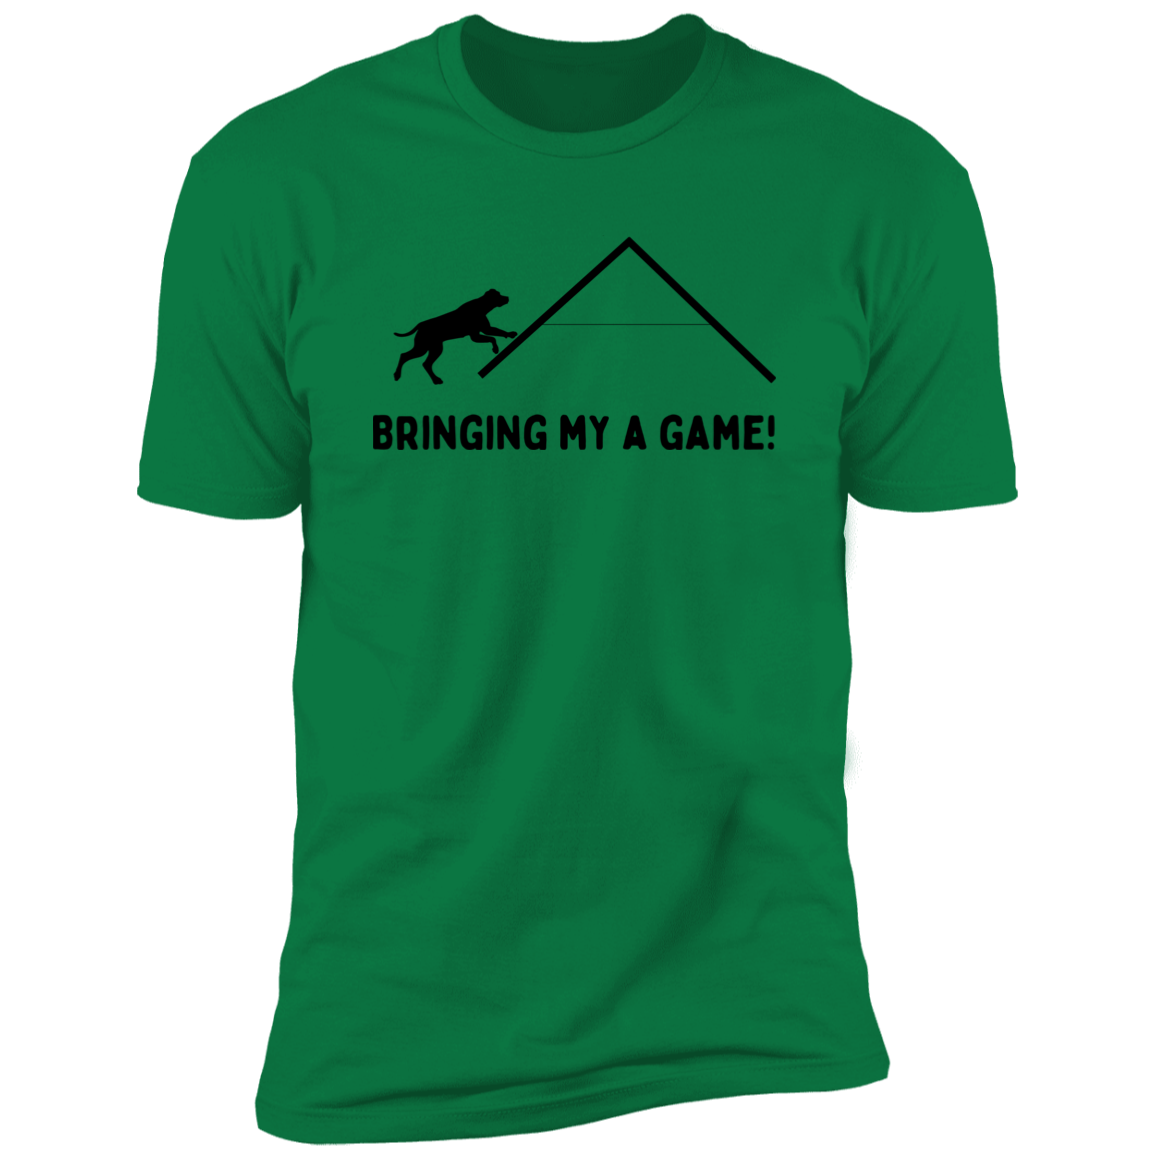 Bringing My A Game Agility T-shirt, Dog Agility Shirt for humans, in kelly green